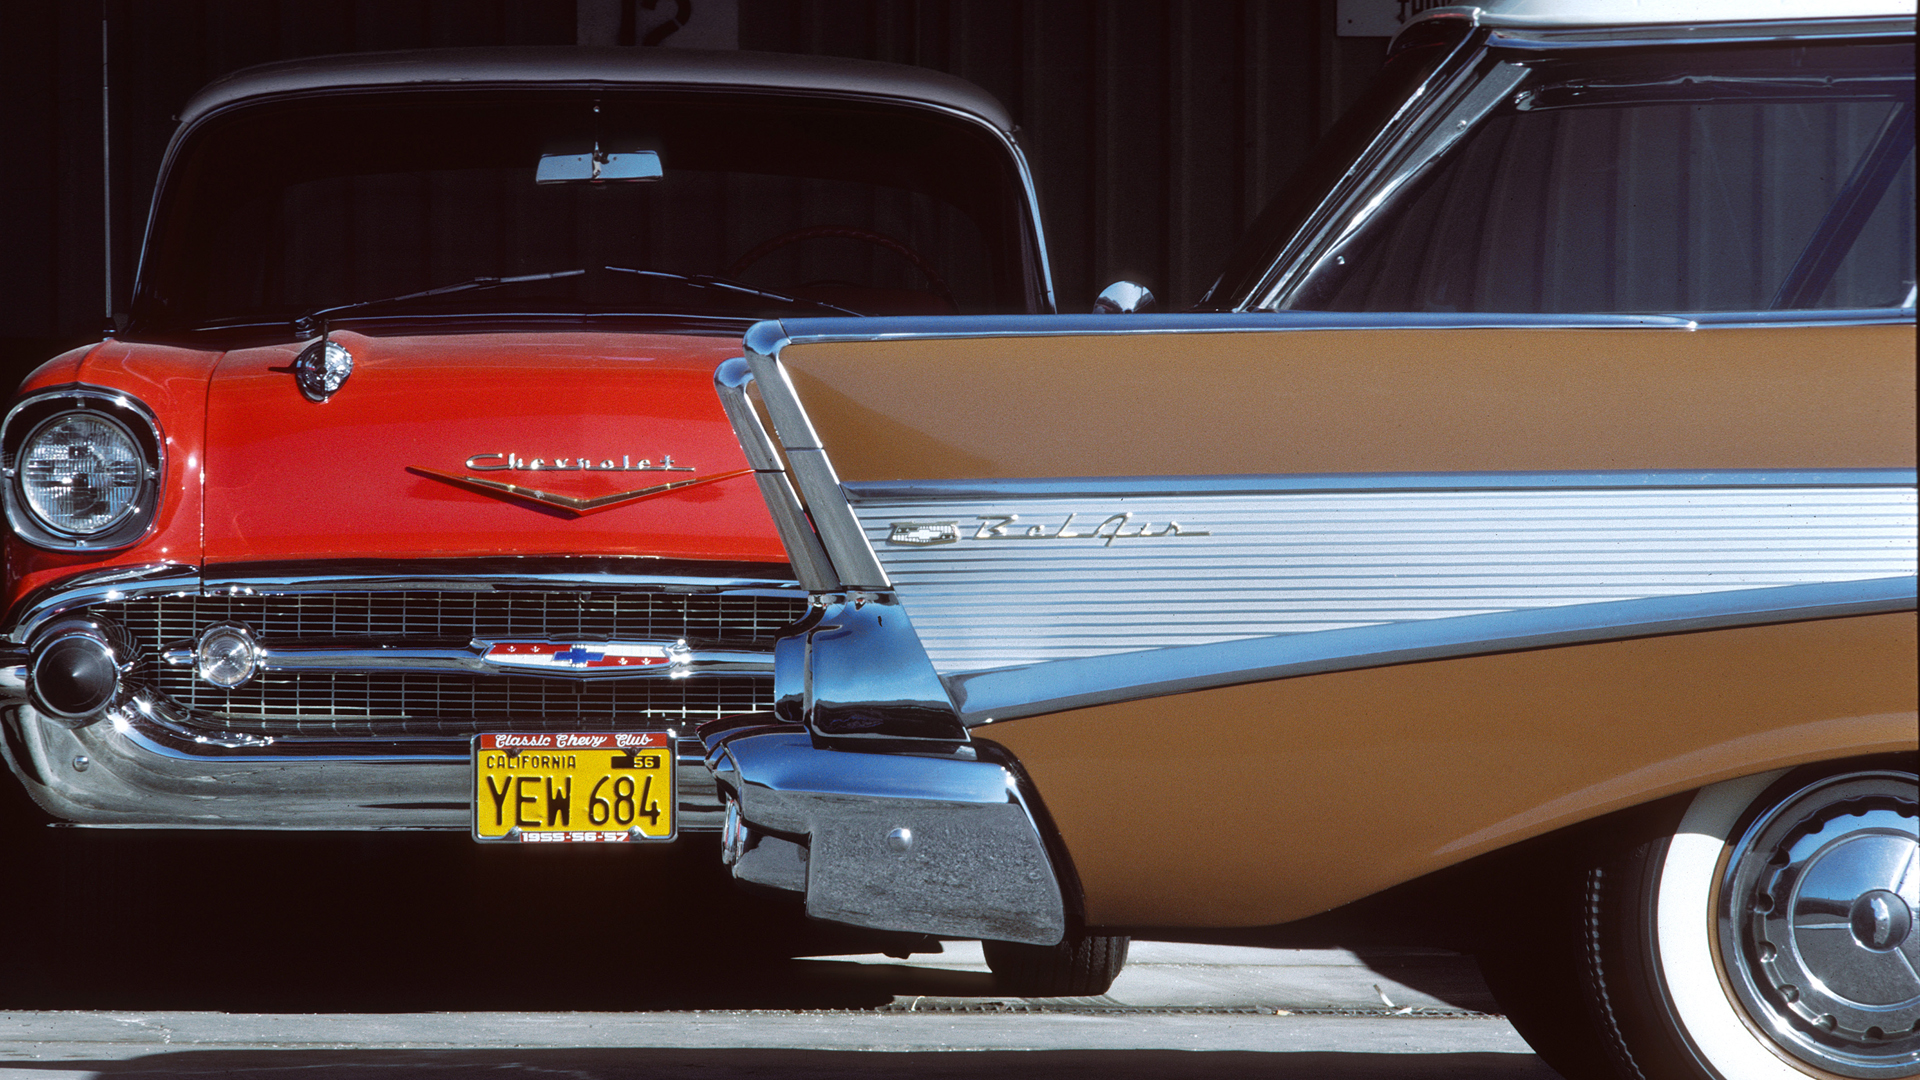 Your Ridiculously Vintage Chevy Wallpaper Is Here